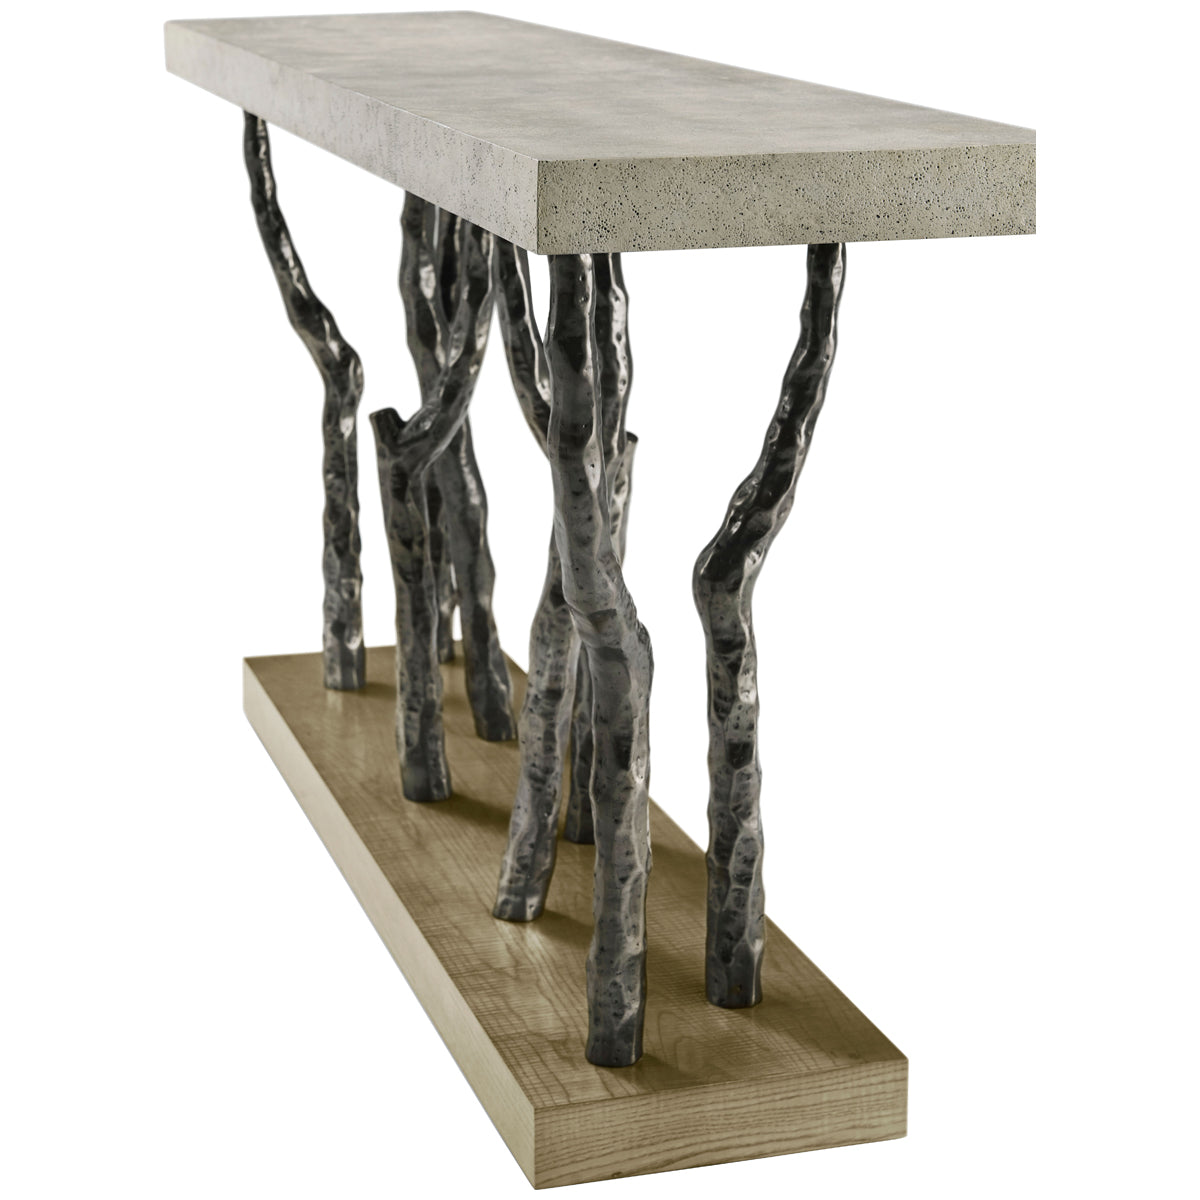 Theodore Alexander Catalina Branch Console Table